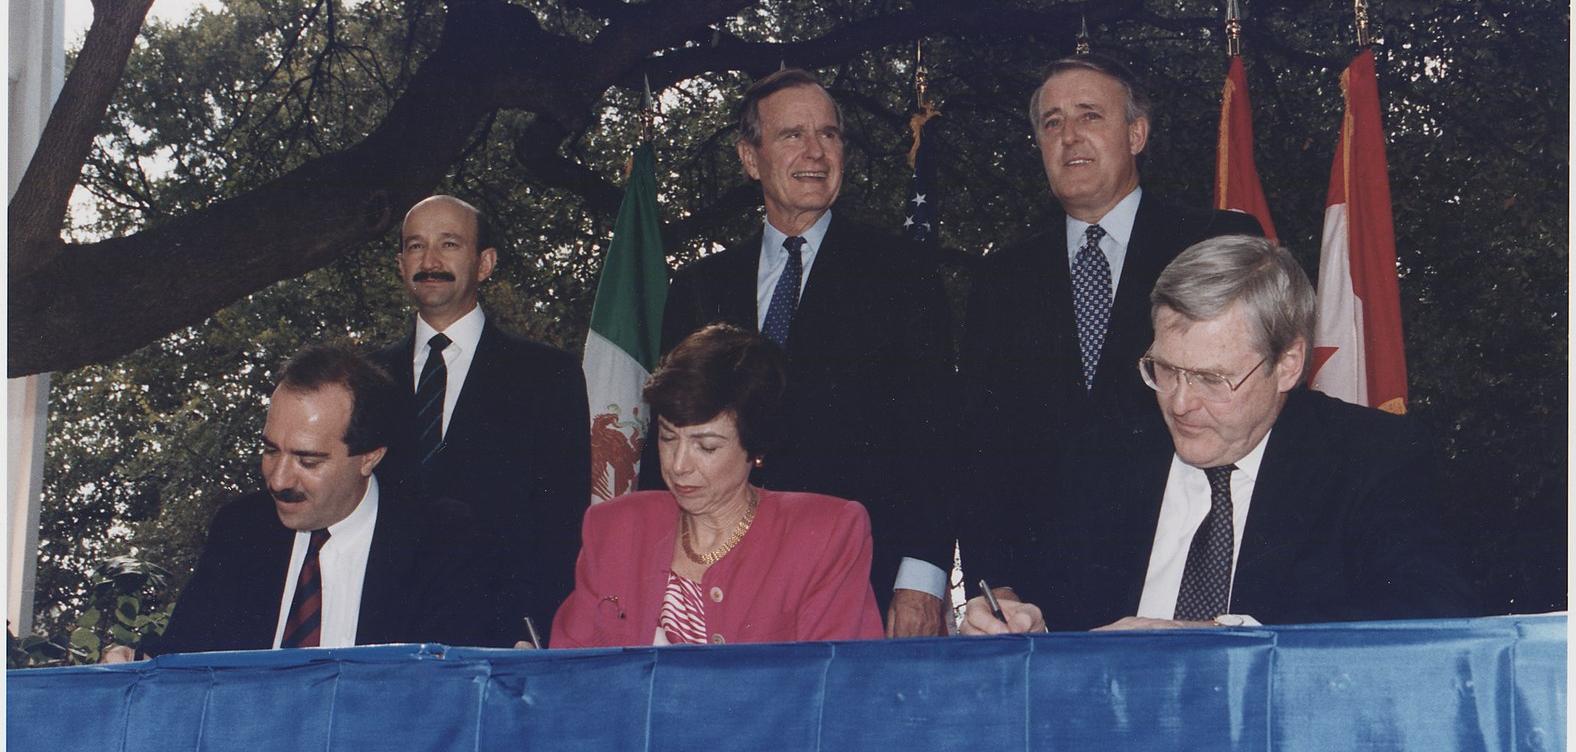 President Bush, Canadian Prime Minister Brian Mulroney and Mexican President Carlos Salinas participate in the initialing ceremony of the North American Free Trade Agreement in San Antonio, Texas.